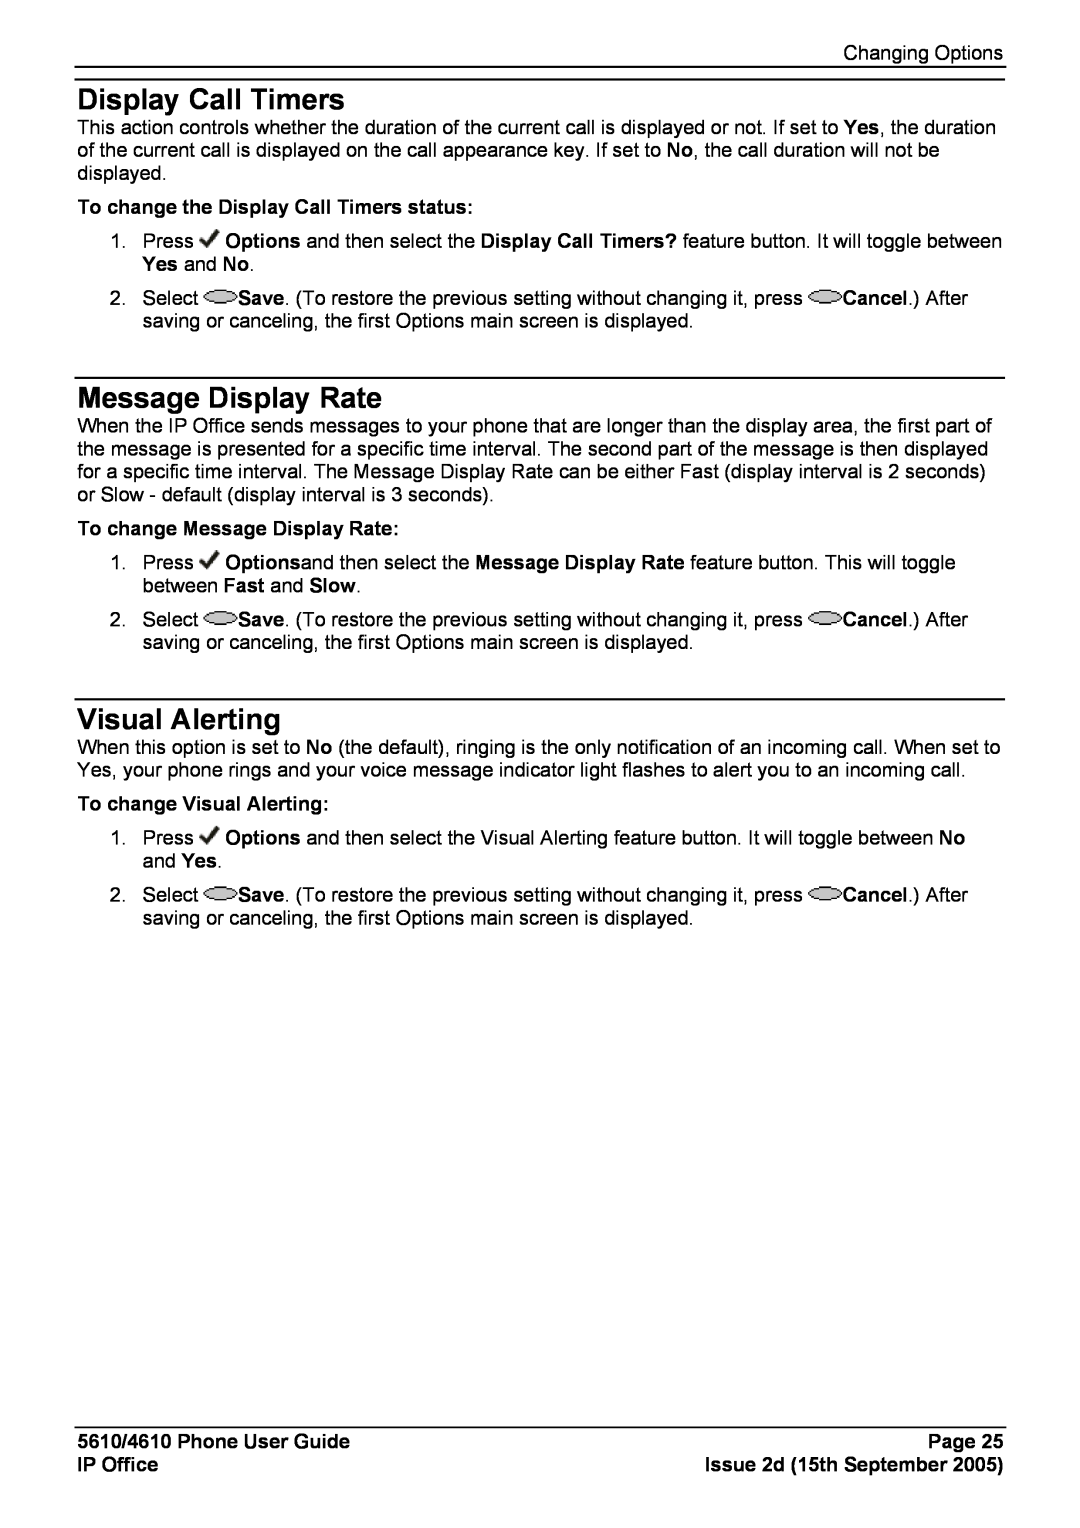 Avaya 5610, 4610 Message Display Rate, To change the Display Call Timers status, To change Visual Alerting, Page 